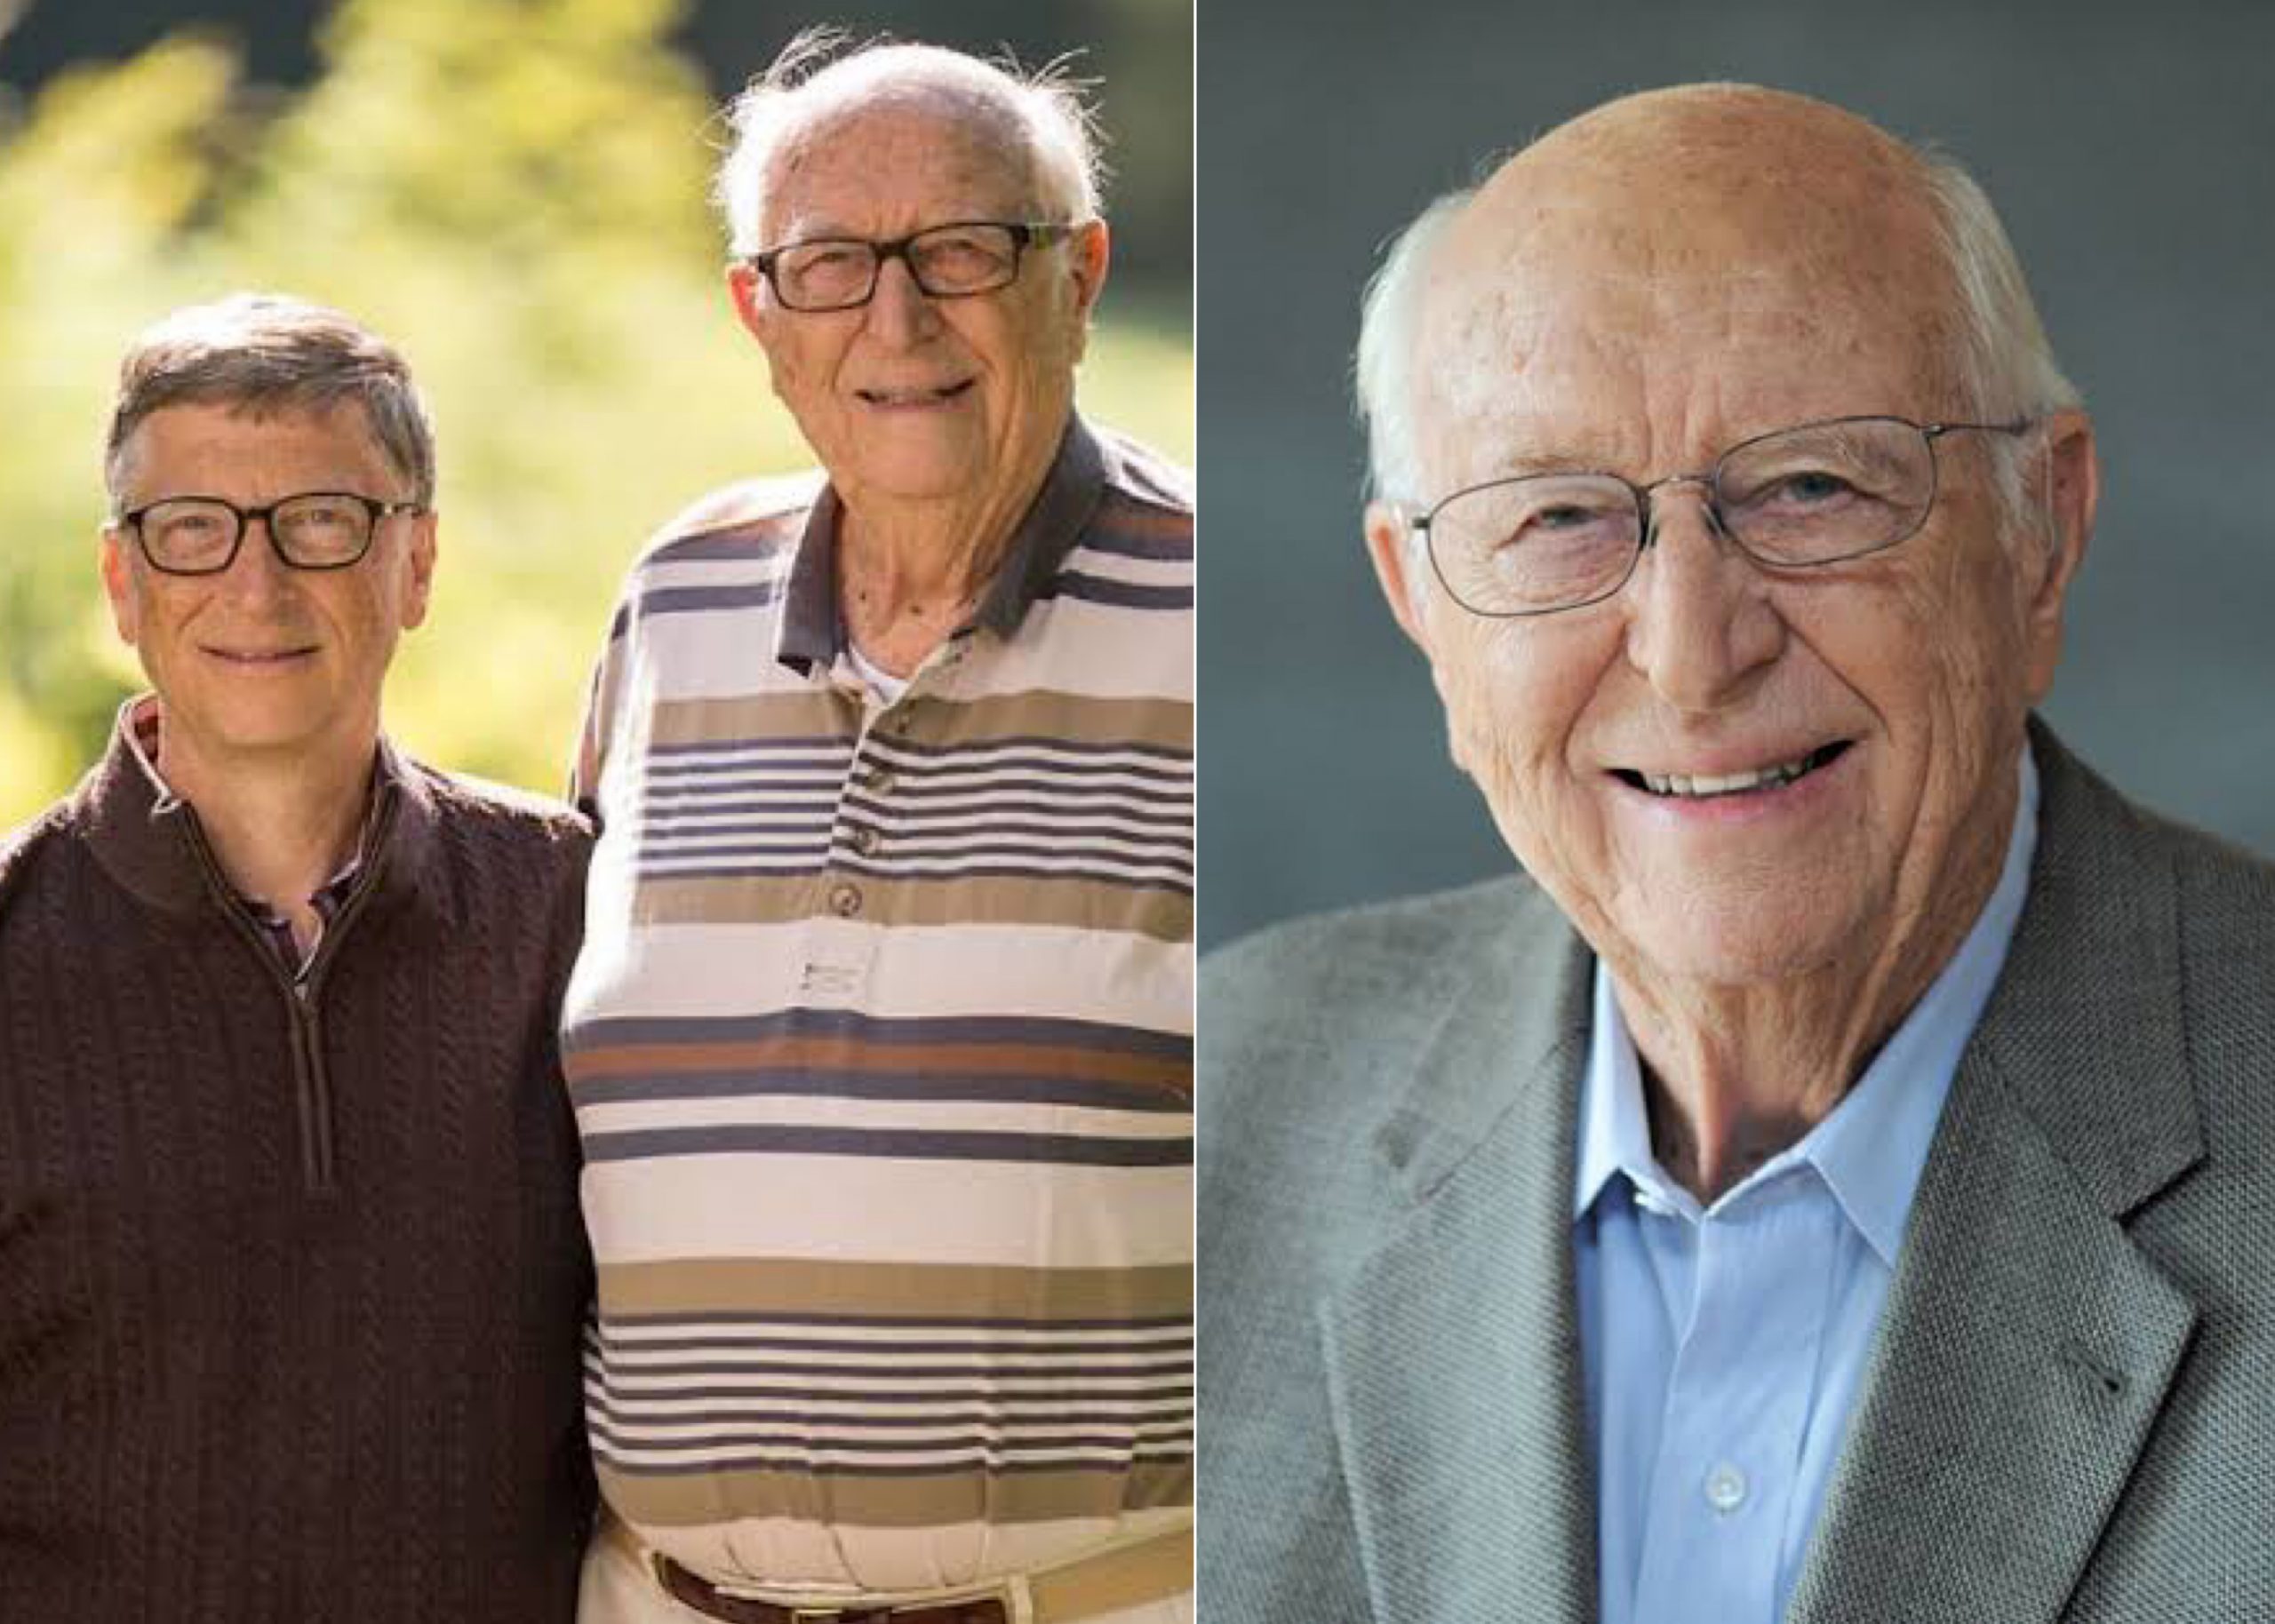 Bill Gates Sr., Father Of Microsoft Founder, Dies At 94 From Alzheimer’s Disease